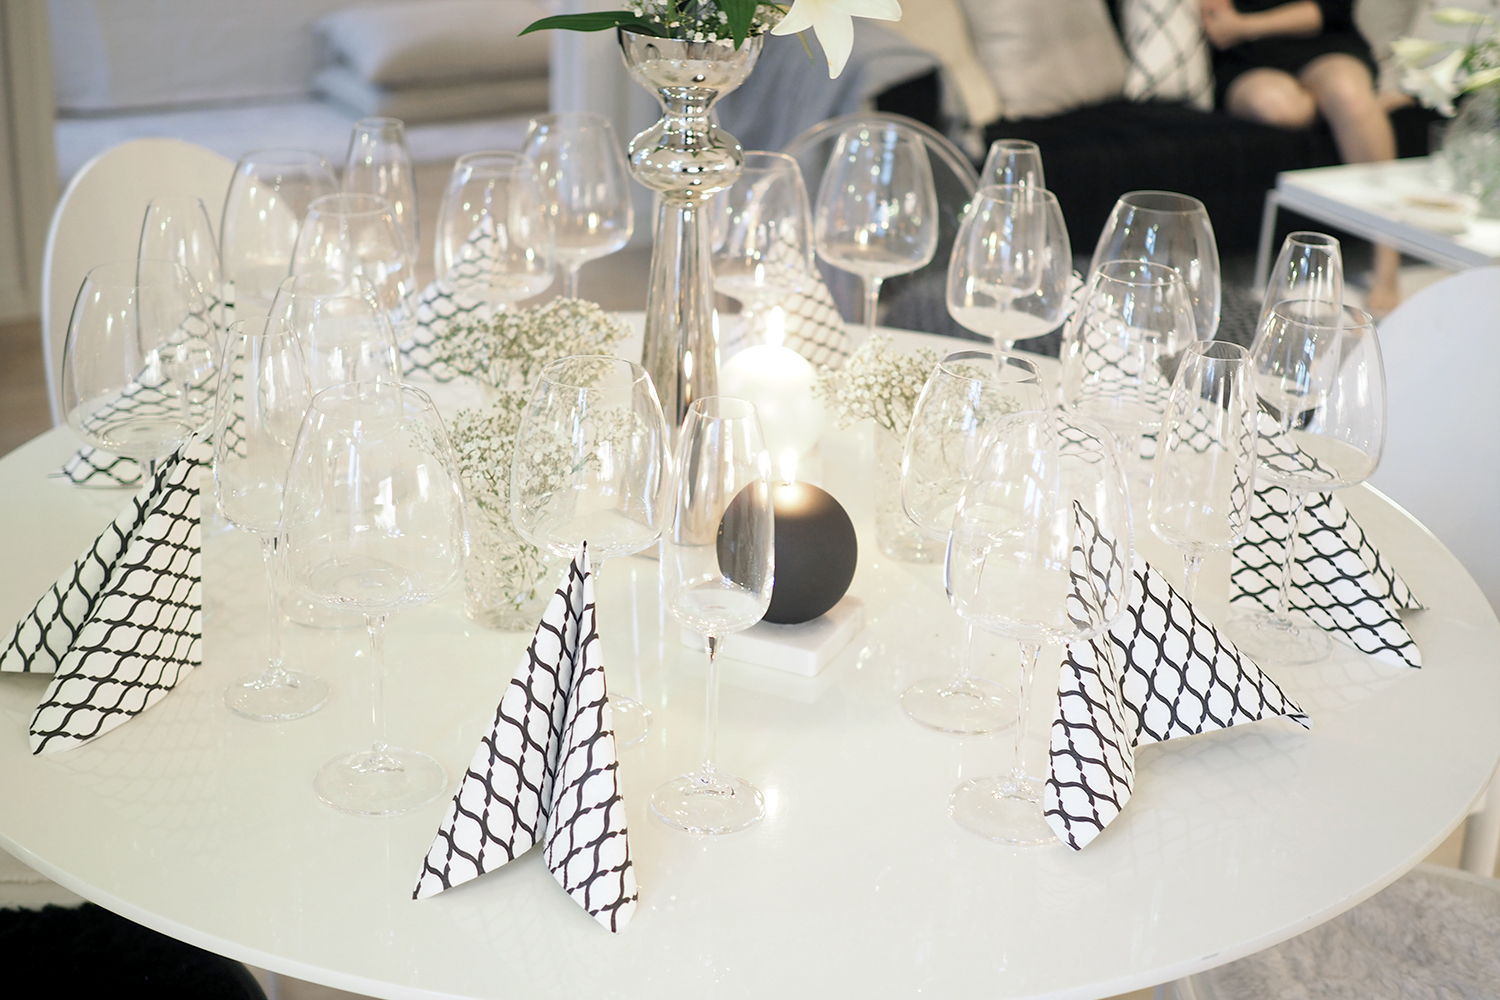 Char and the city - Ideas for a wine tasting - decoration, wines, wine glasses - read more on the blog: //www.idealista.fi/charandthecity/2016/09/27/viininmaistelu #winetasting #redwine #whitewine #sparklingwine #wineglasses #tablesetting #kitchen #party